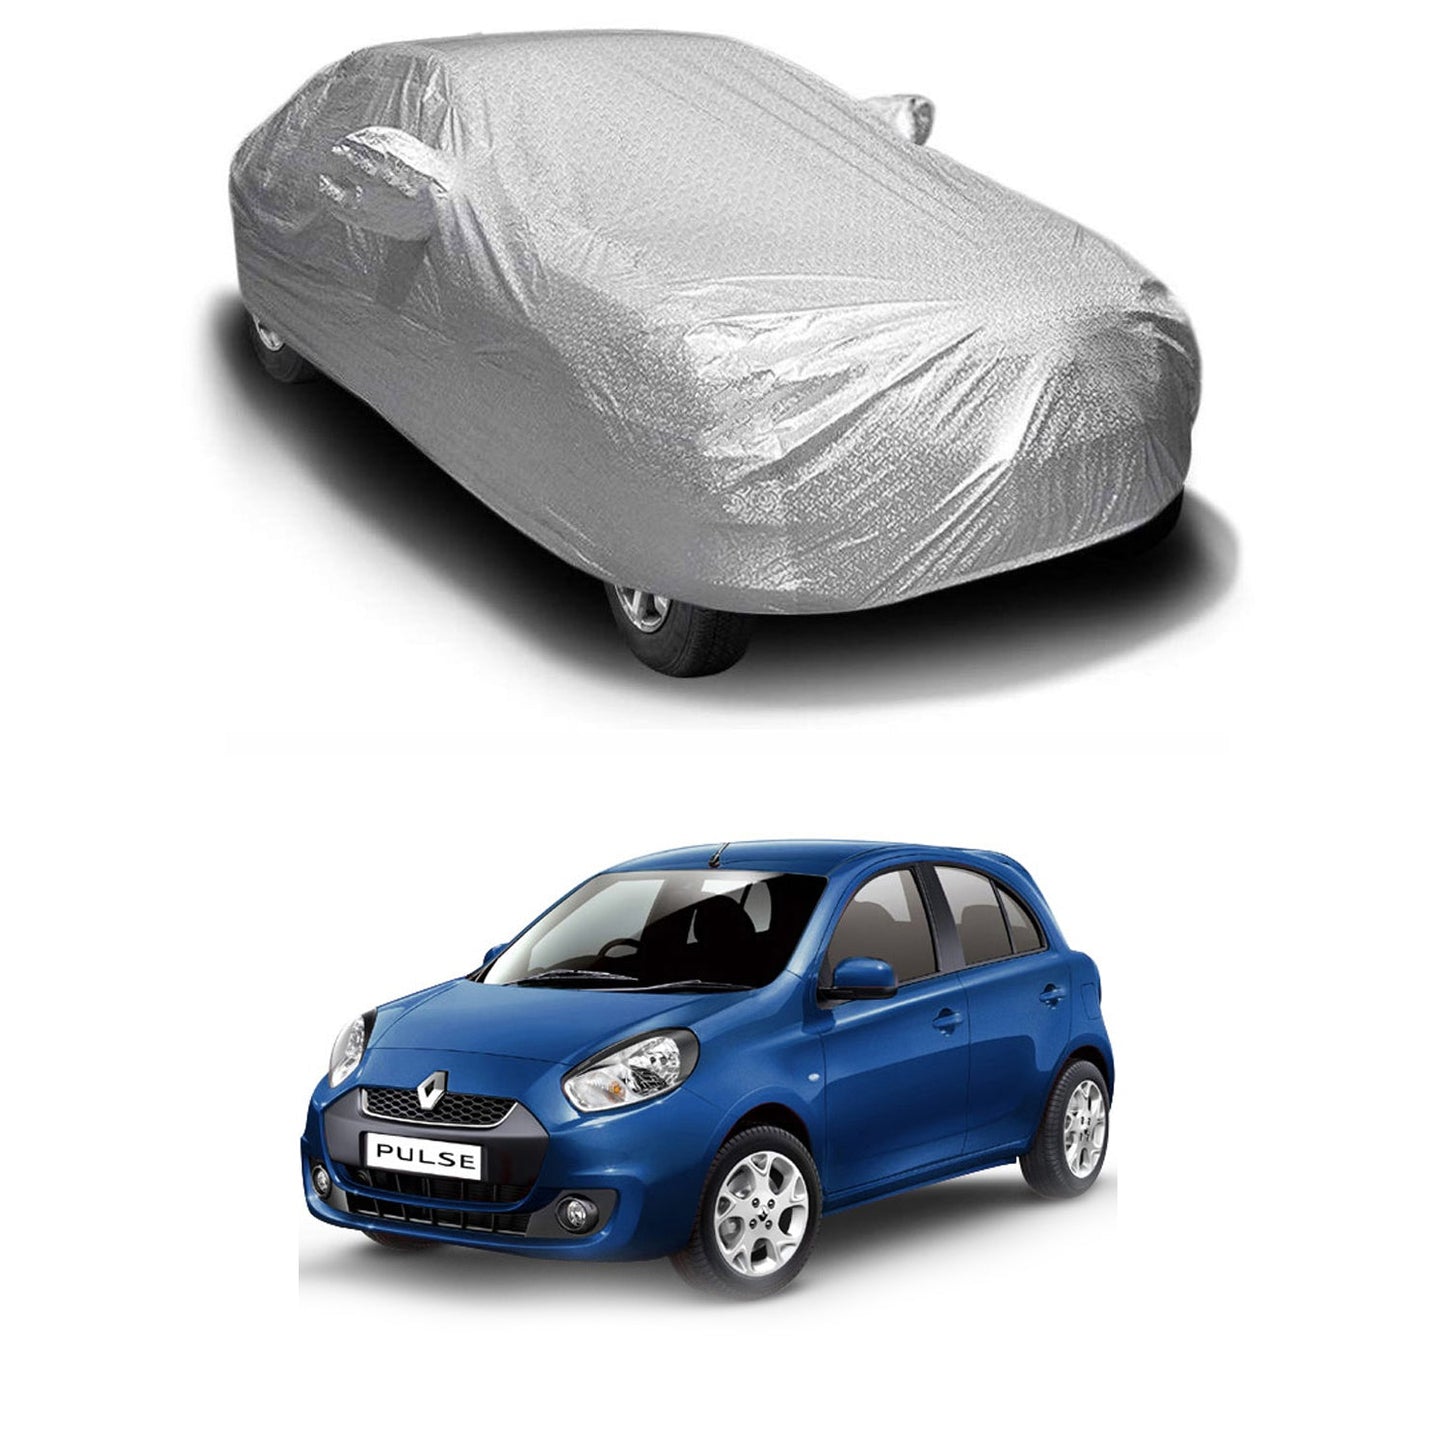 Oshotto Spyro Silver Anti Reflective, dustproof and Water Proof Car Body Cover with Mirror Pockets For Renault Pulse